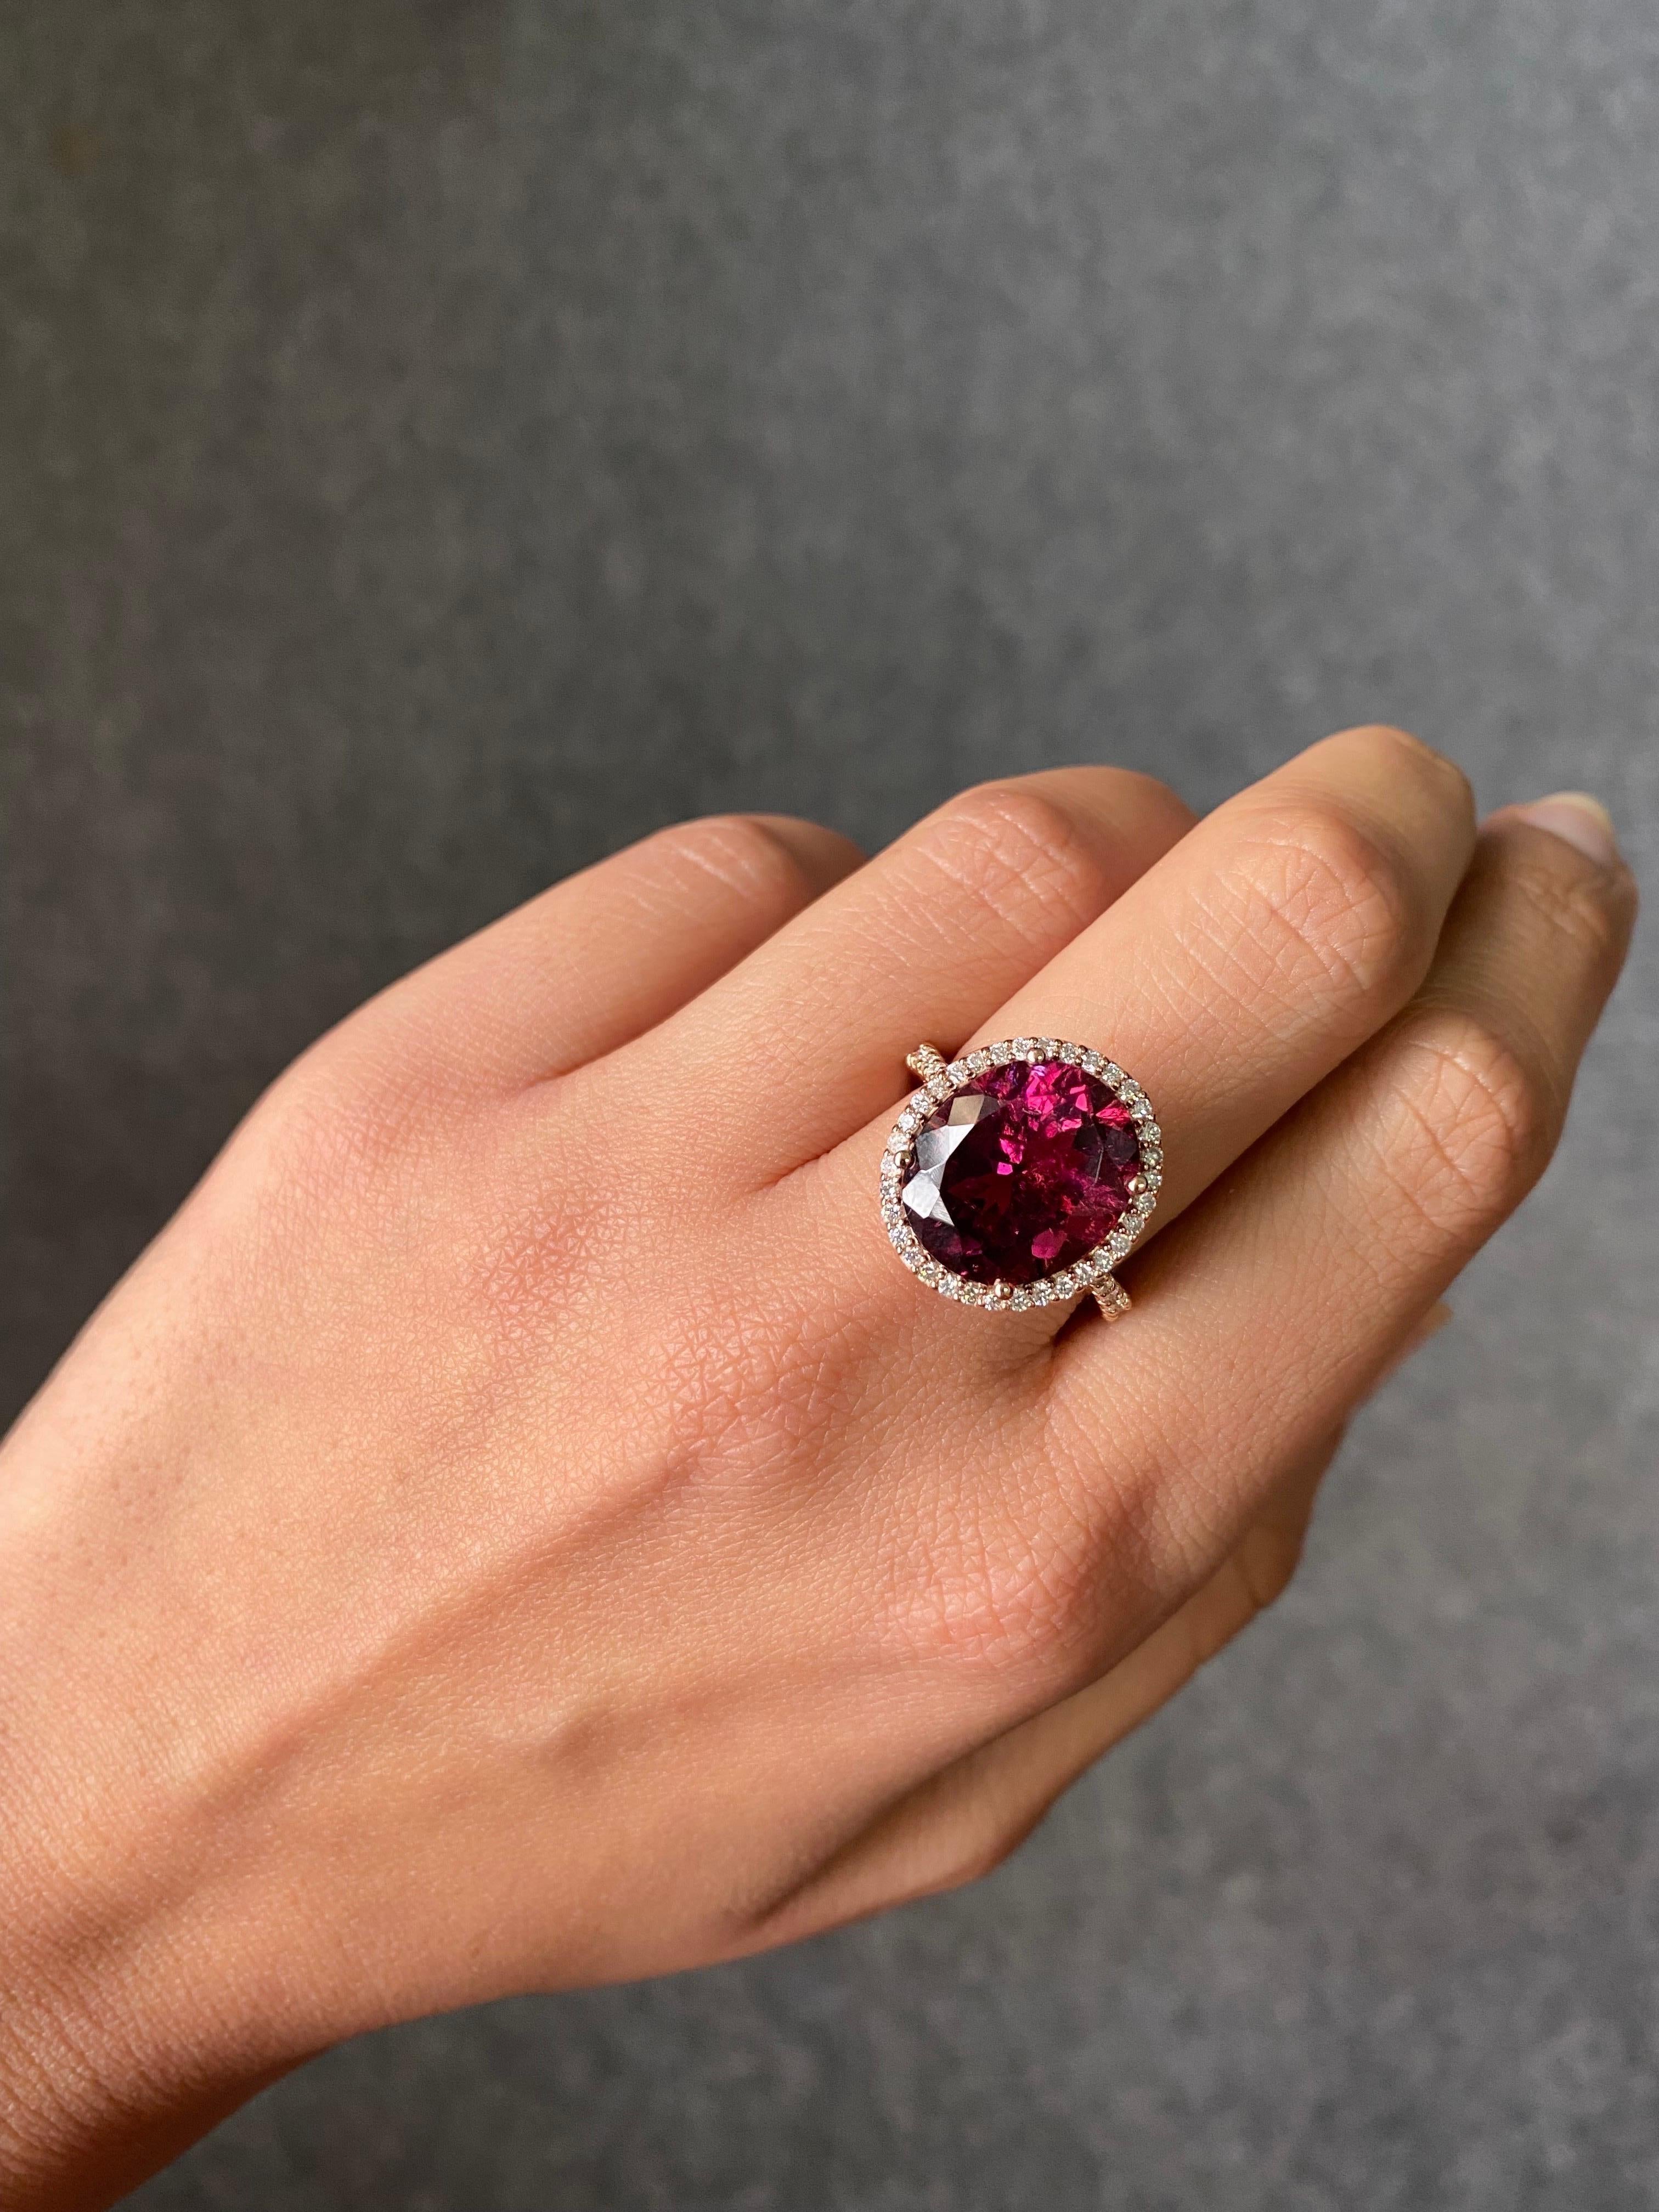 A beautiful, oval shaped 7.95 carat Tourmaline center stone adorned with 0.6 carats White Diamonds, all set in solid 18K Rose Gold. The Tourmaline is of an eye-catching deep pink color, and amazing luster. The ring is currently sized at US7, can be